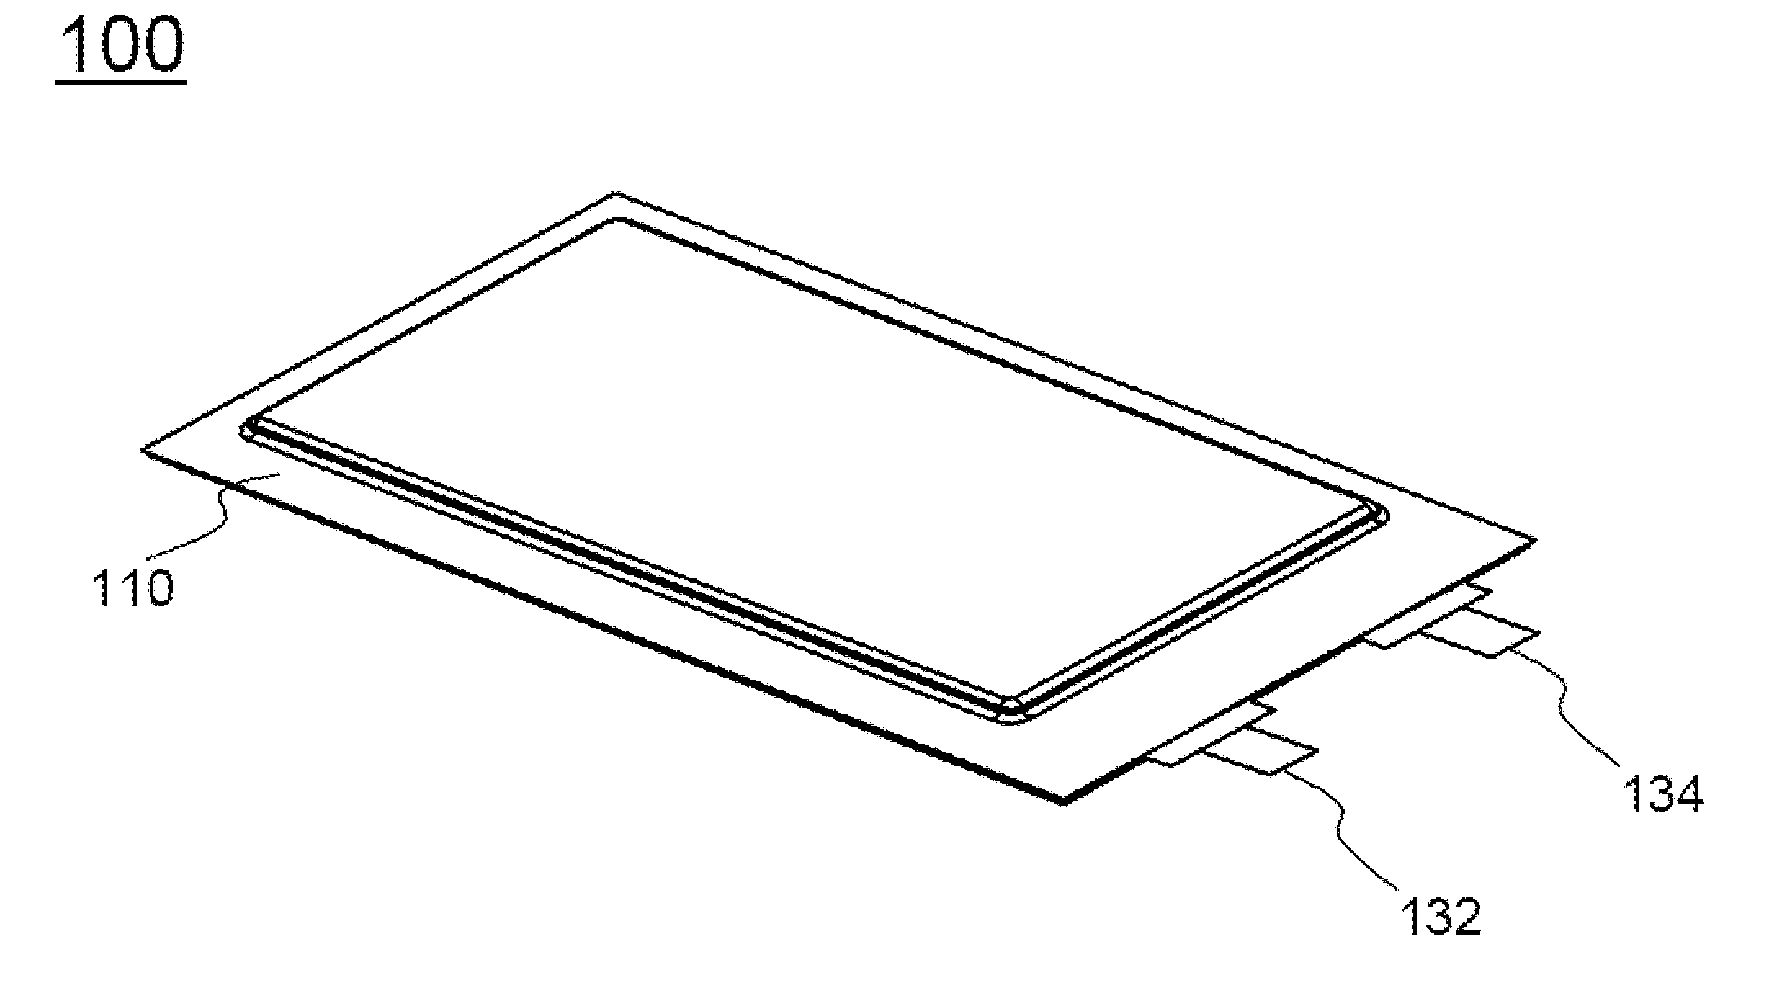 Battery module with cooling structure of high efficiency